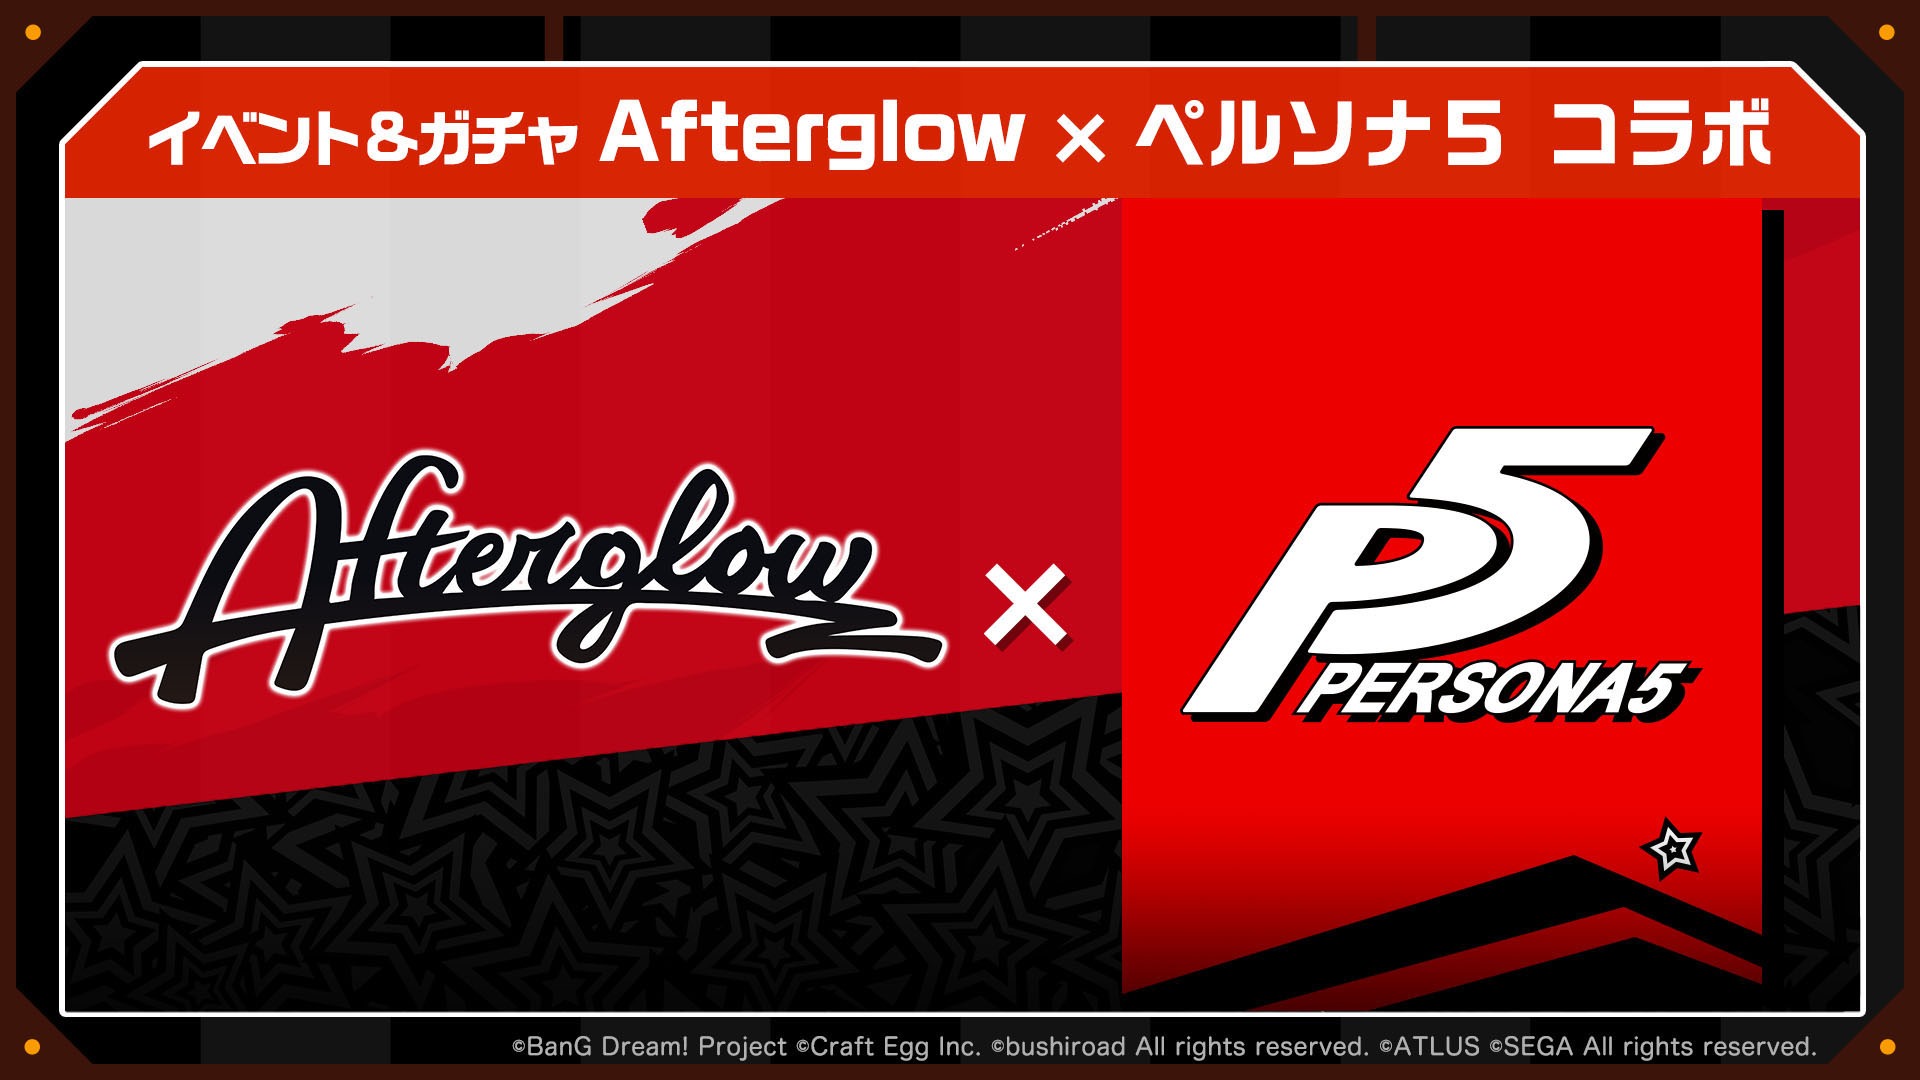 There's a New Persona 5 Game, But It's a Gacha for Smartphones